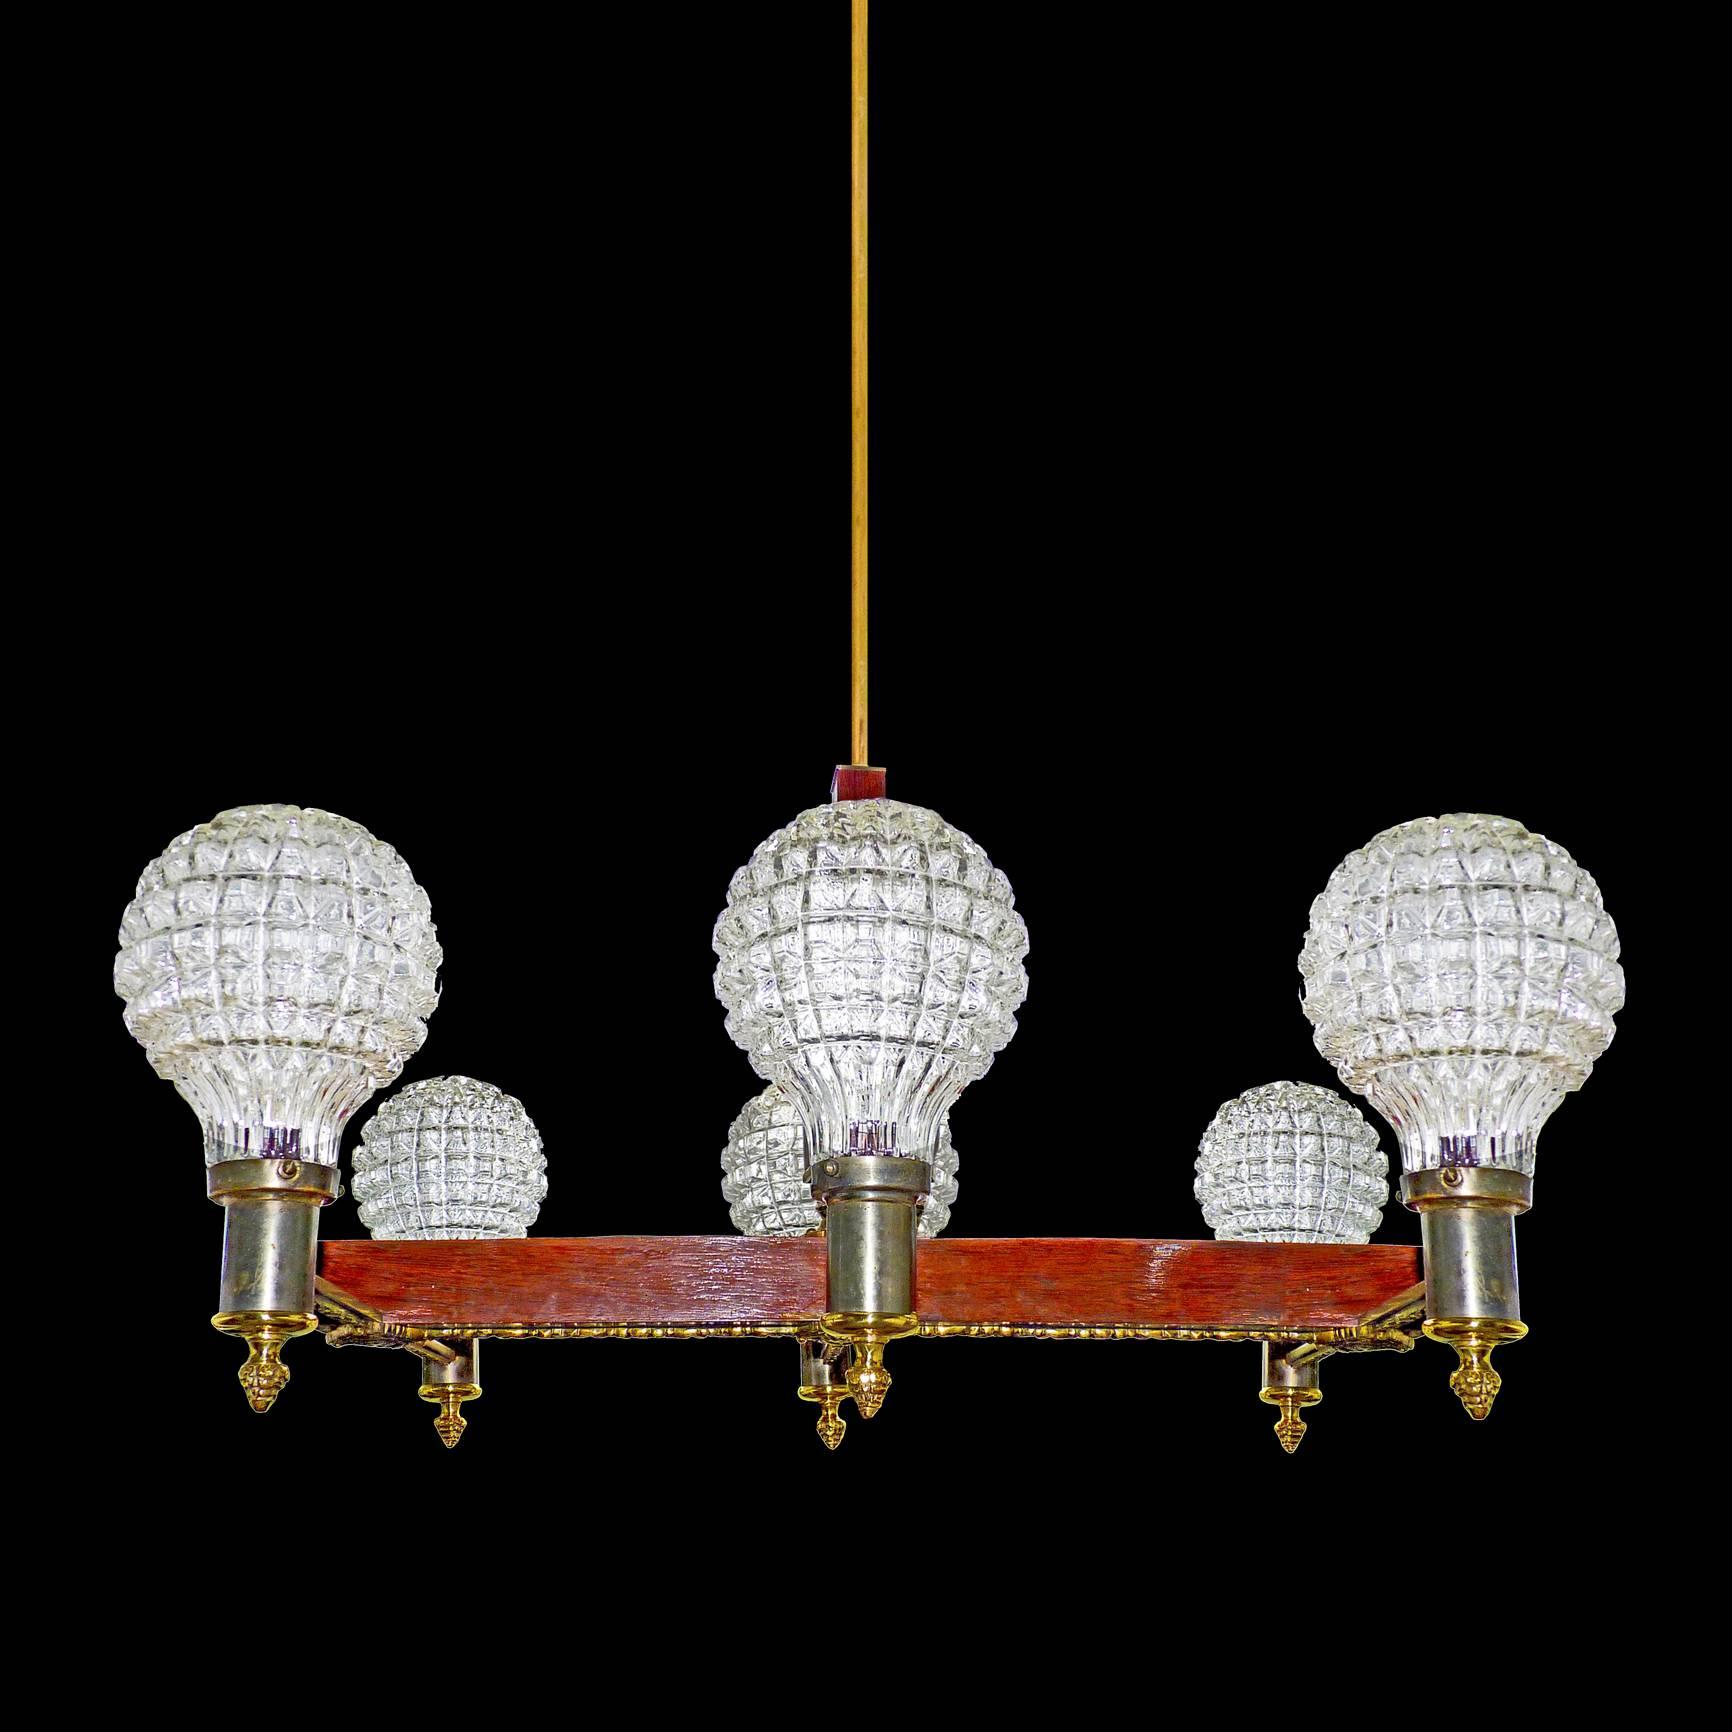 20th Century Large Modernist French Art Deco Gilt Bronze on Wood 6-Light Ice Glass Chandelier For Sale